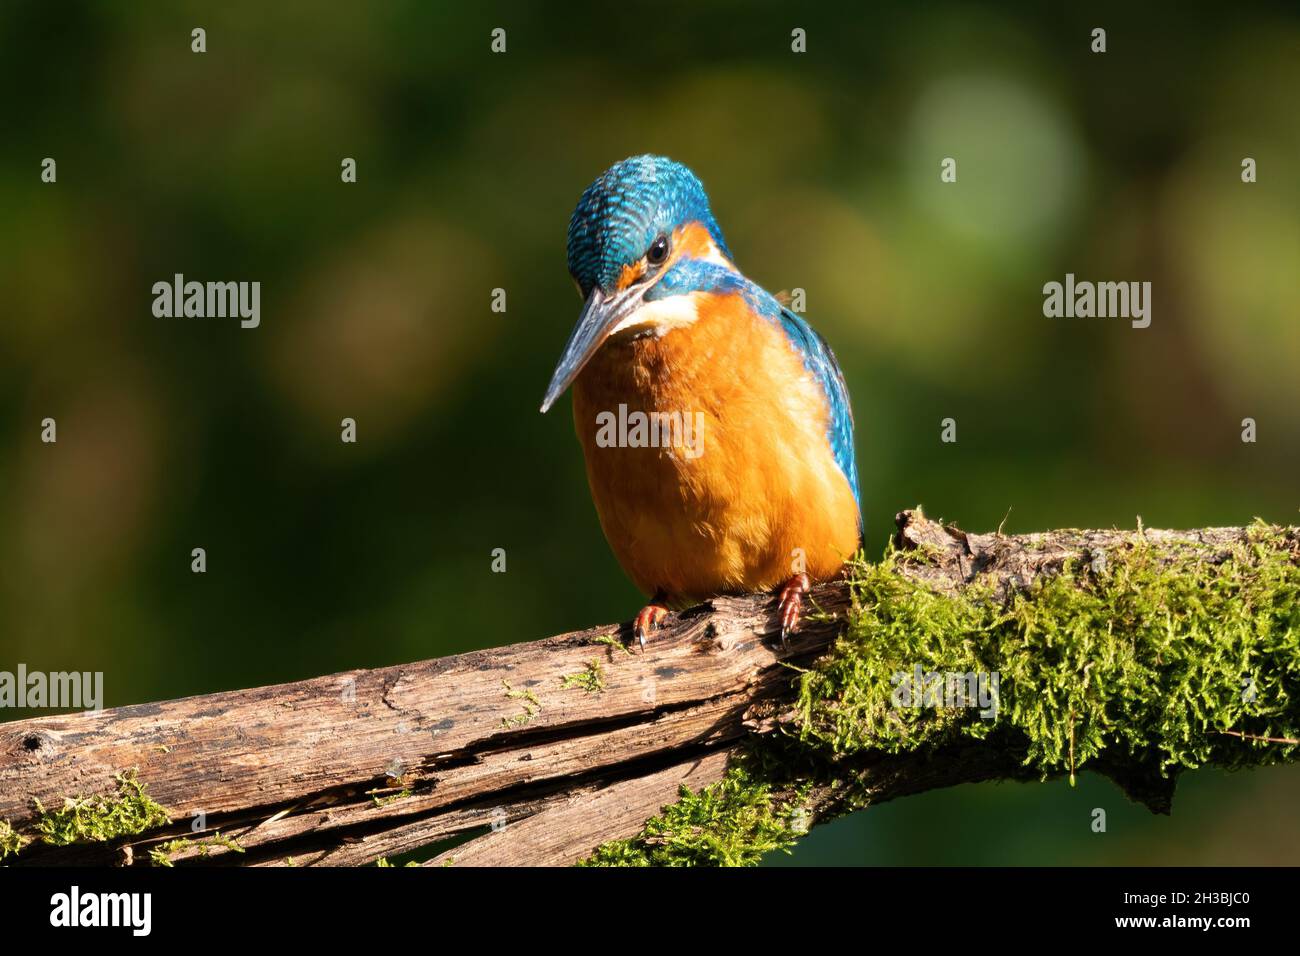 Kingfisher (Alcedo atthis), a colourful bird, on a perch looking down into a pond to find a fish, UK Stock Photo